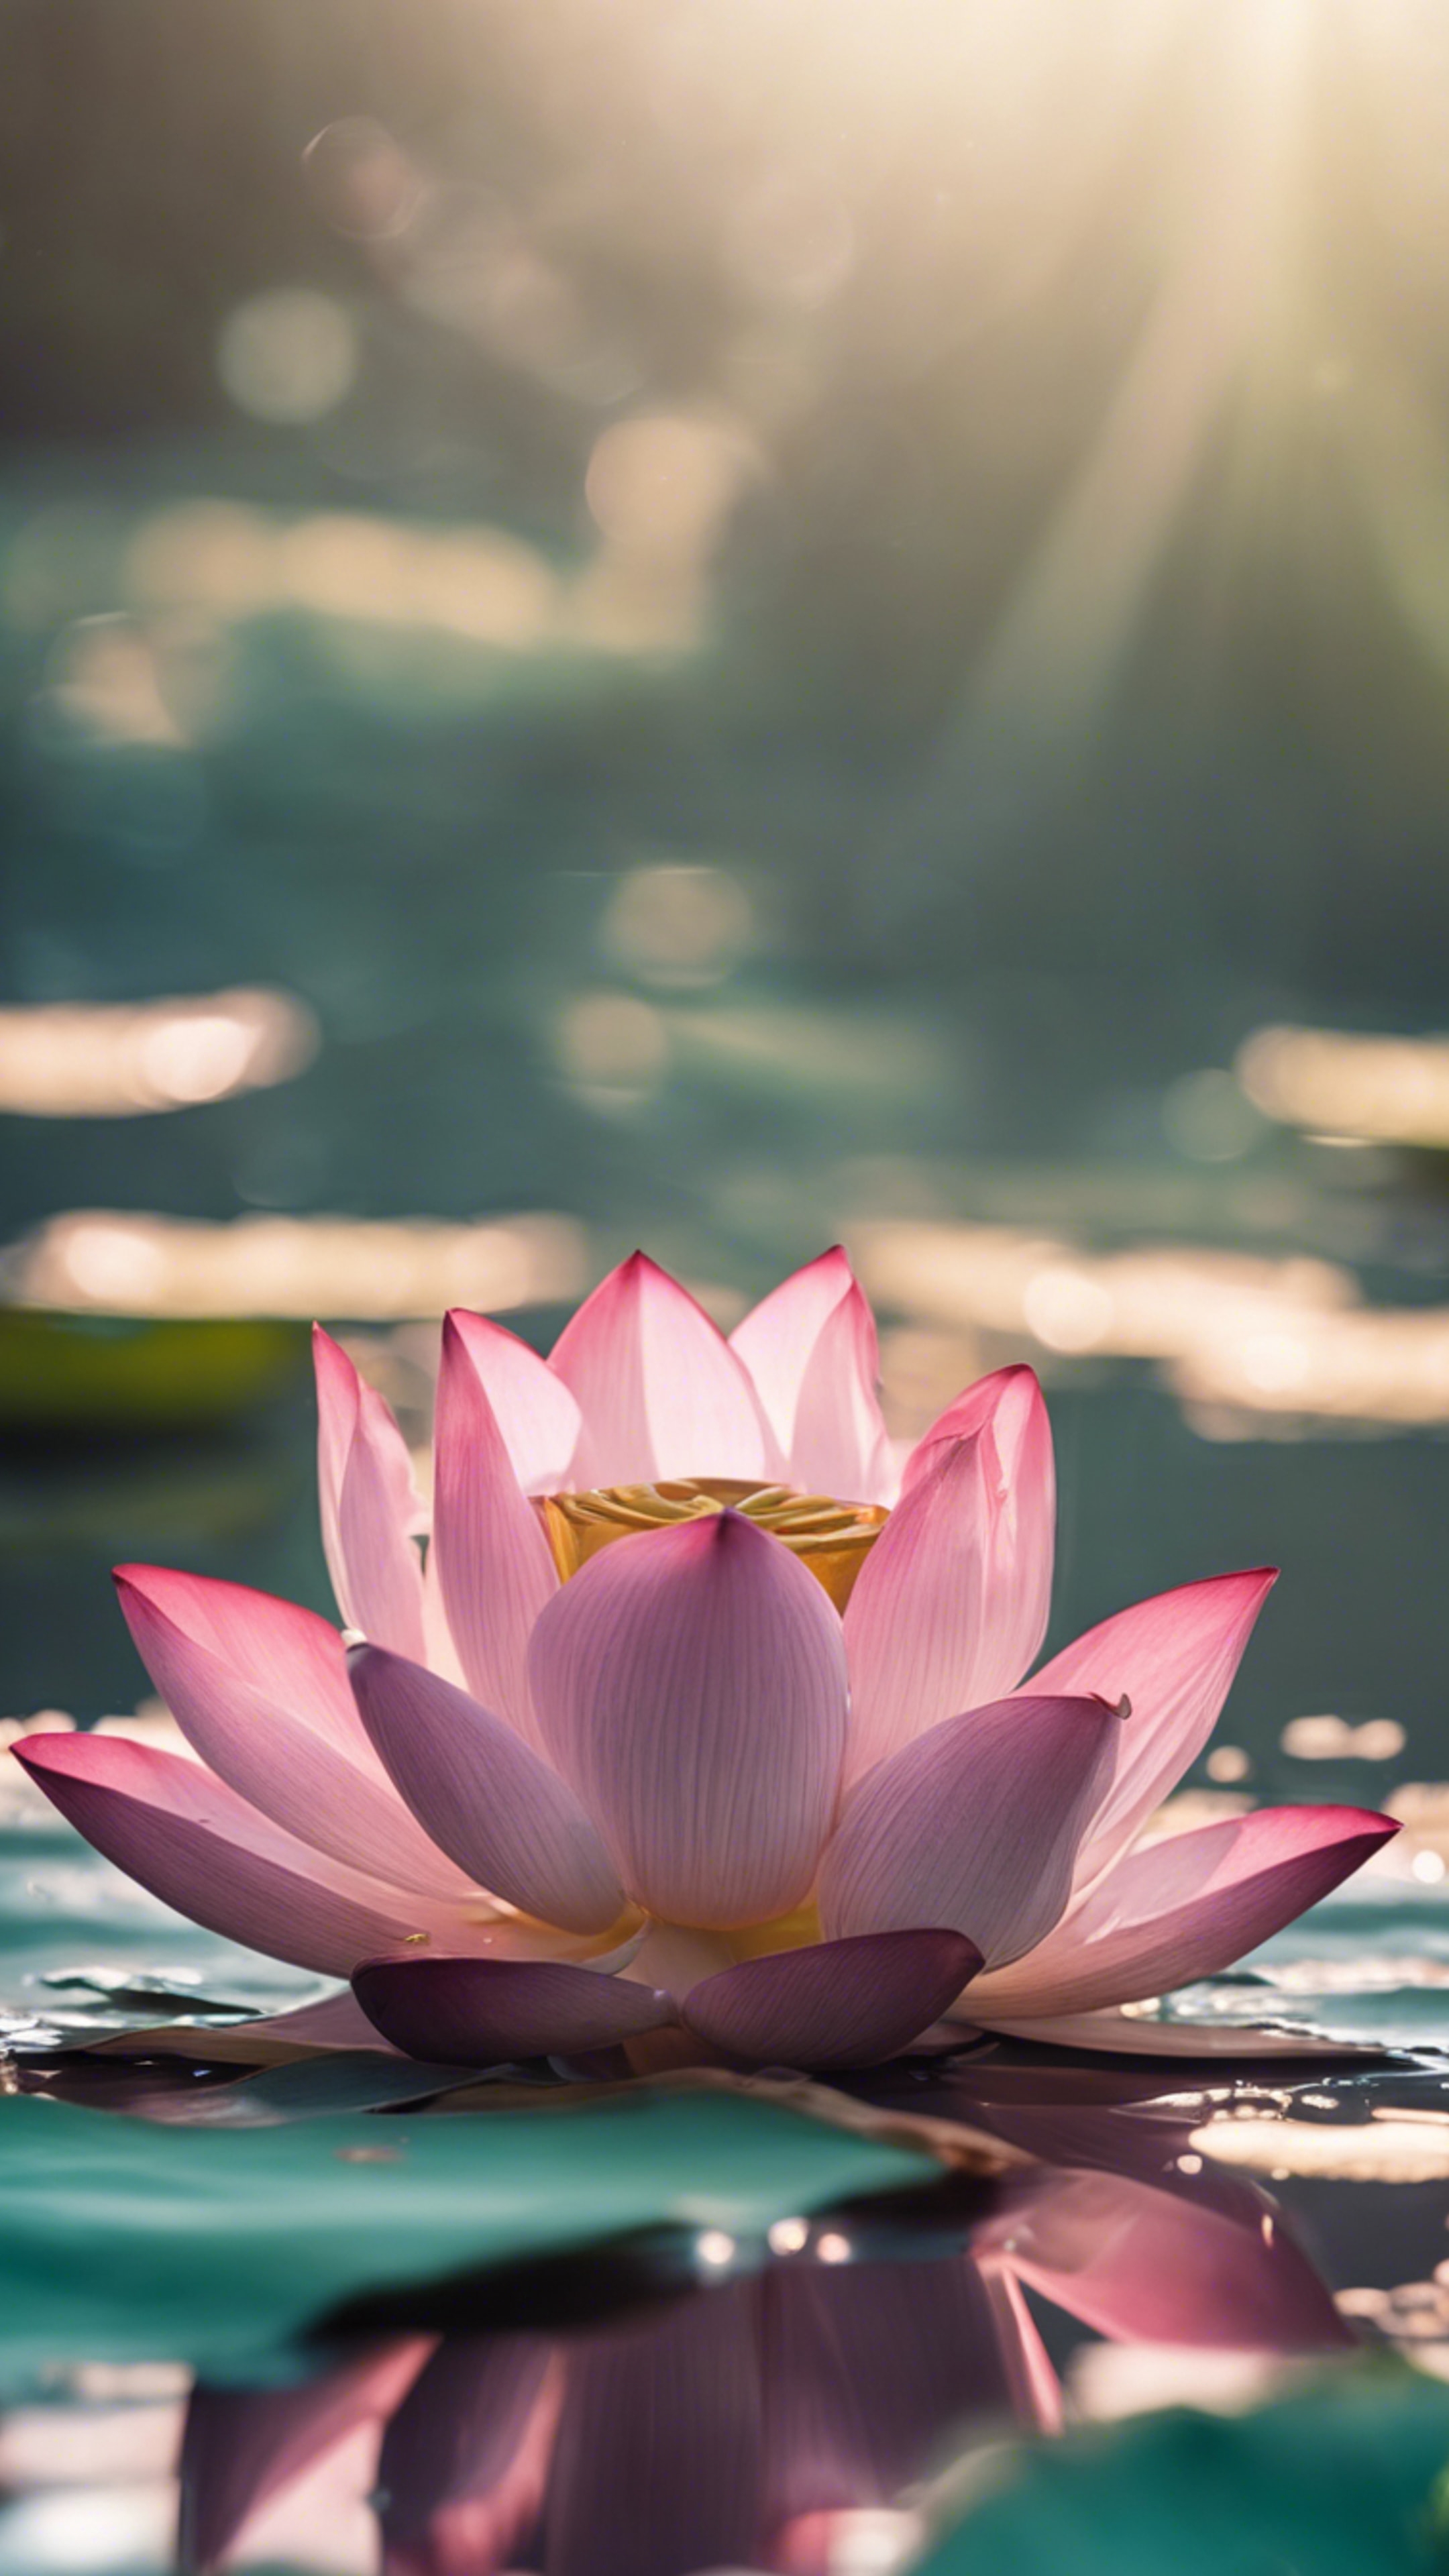 A close-up image of a single blooming lotus on a clear pond. Behang[056d411e4bd14d9f8d69]